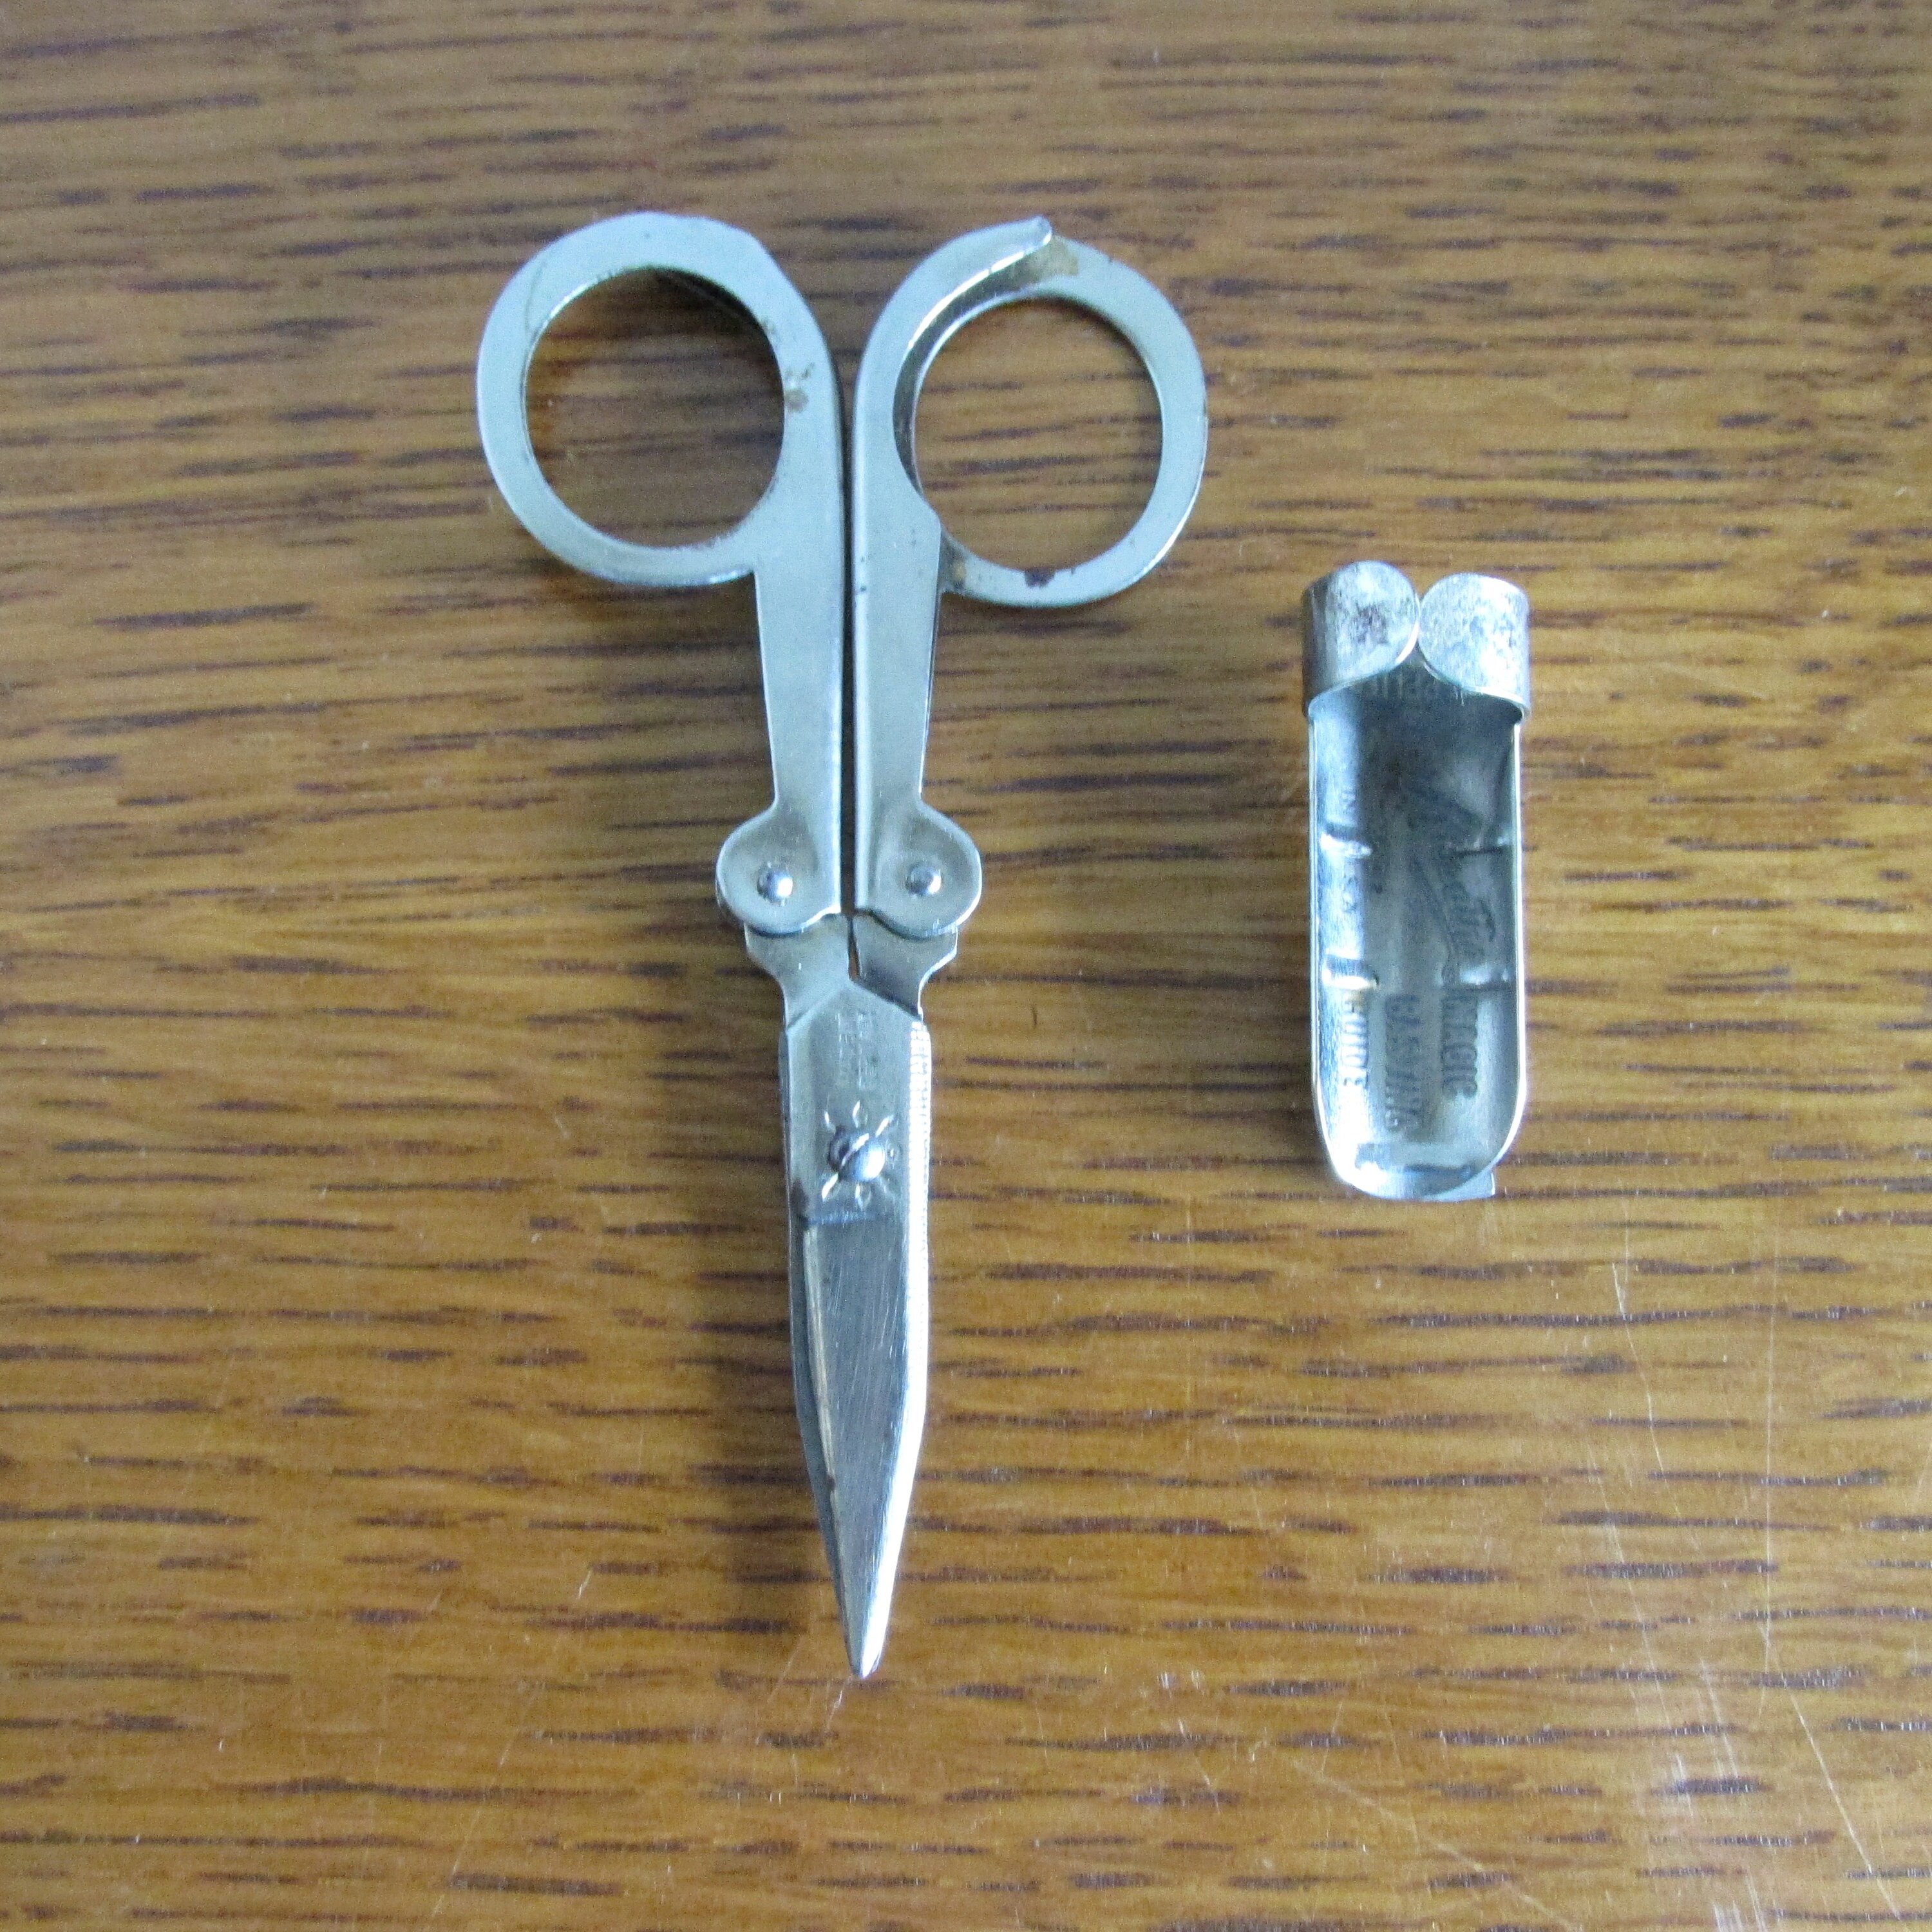 LOT of 6 Vintage Collection of Small Metal Scissors